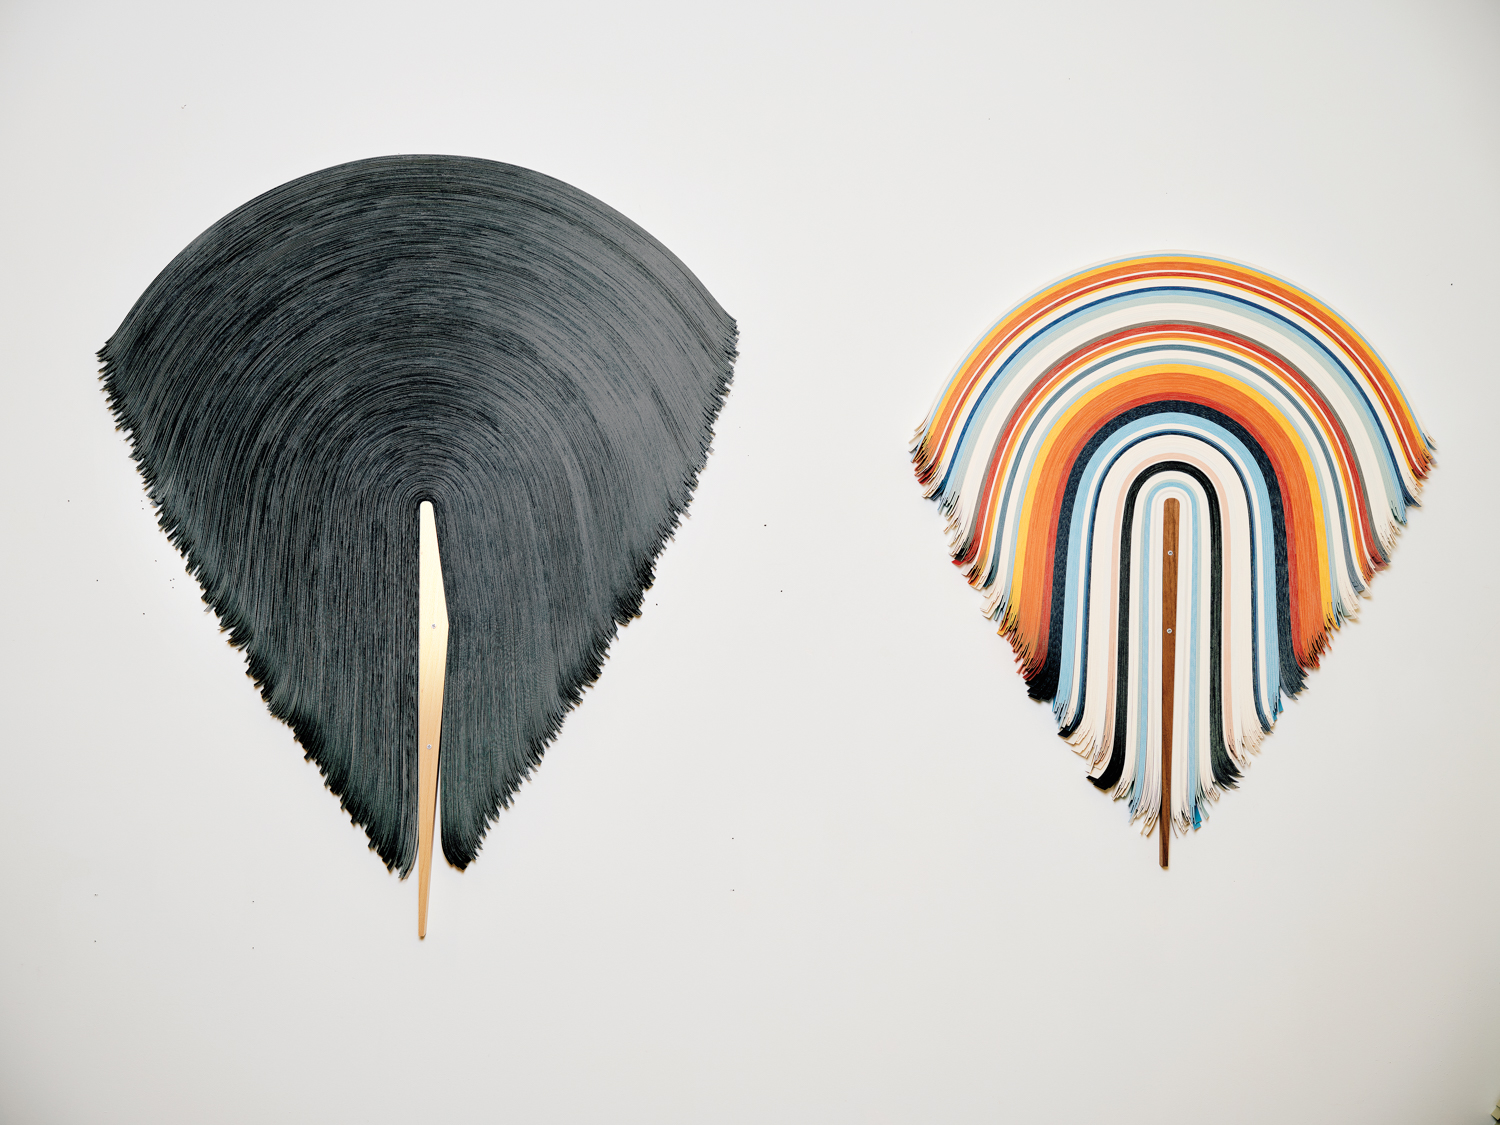 draped vinyl sculptures hung on wall